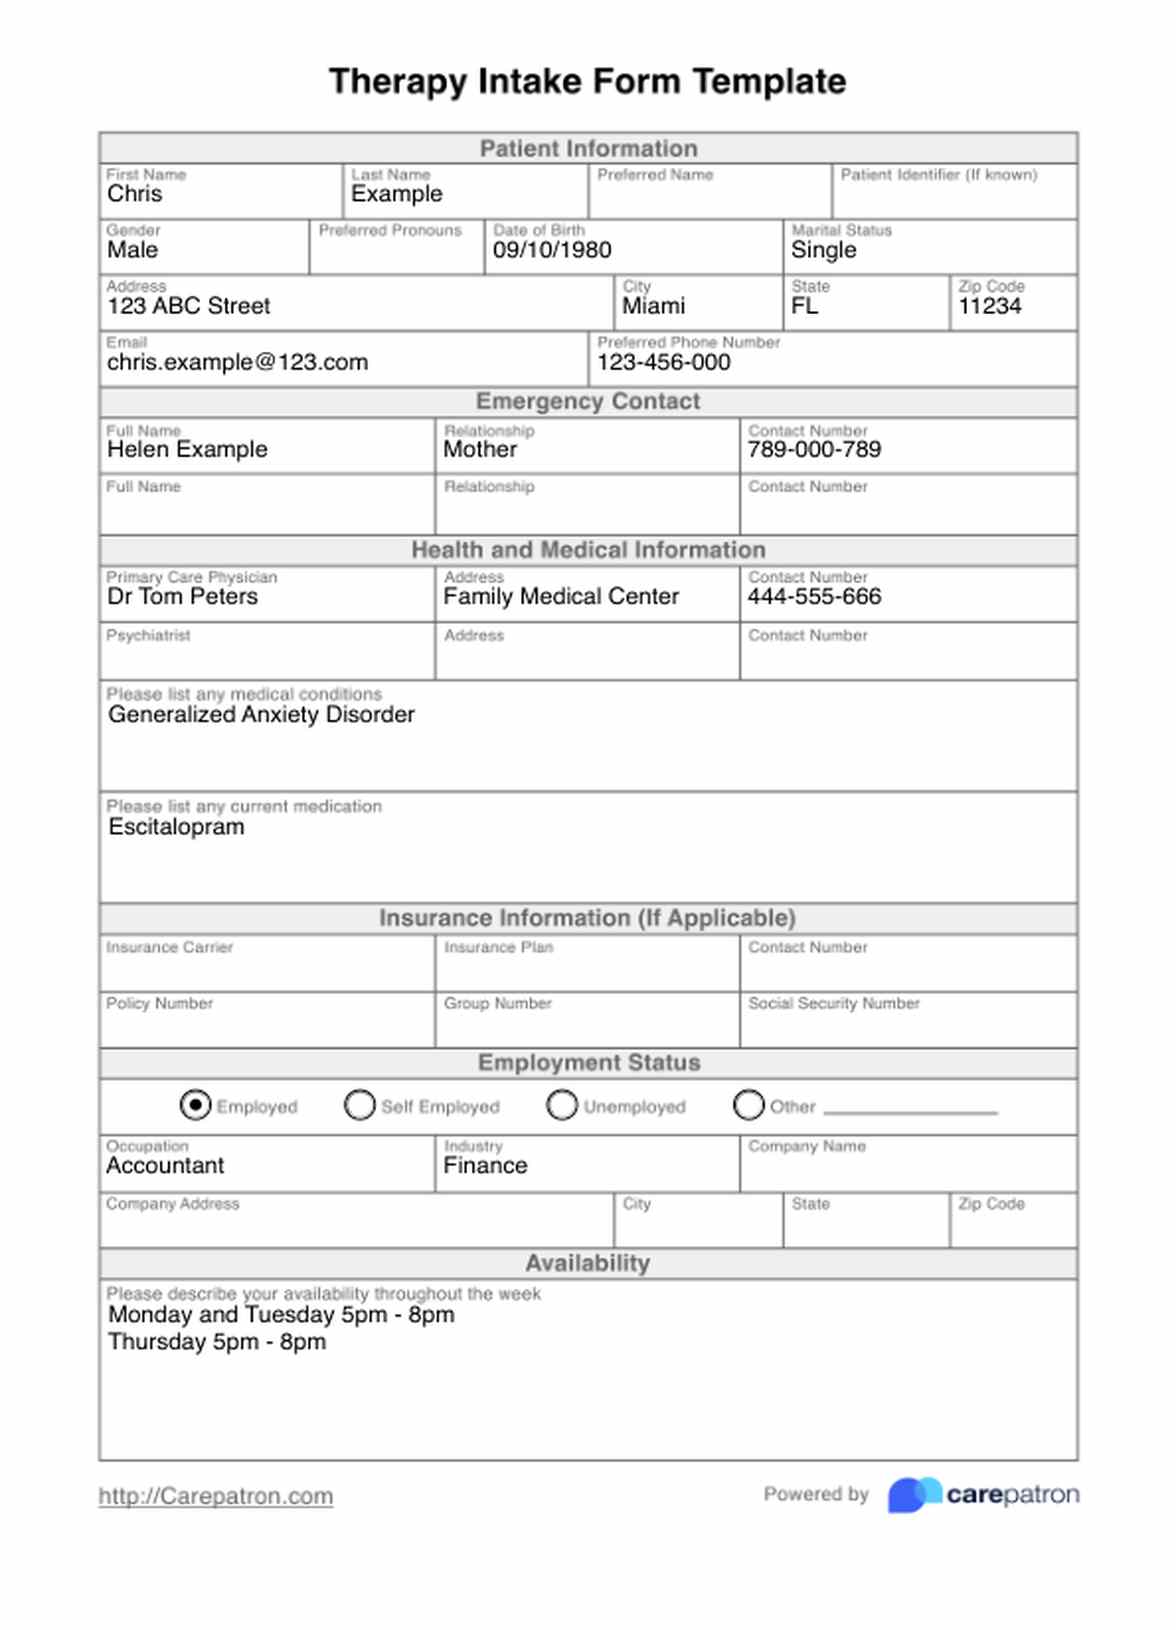 Therapy Intake Form PDF Example